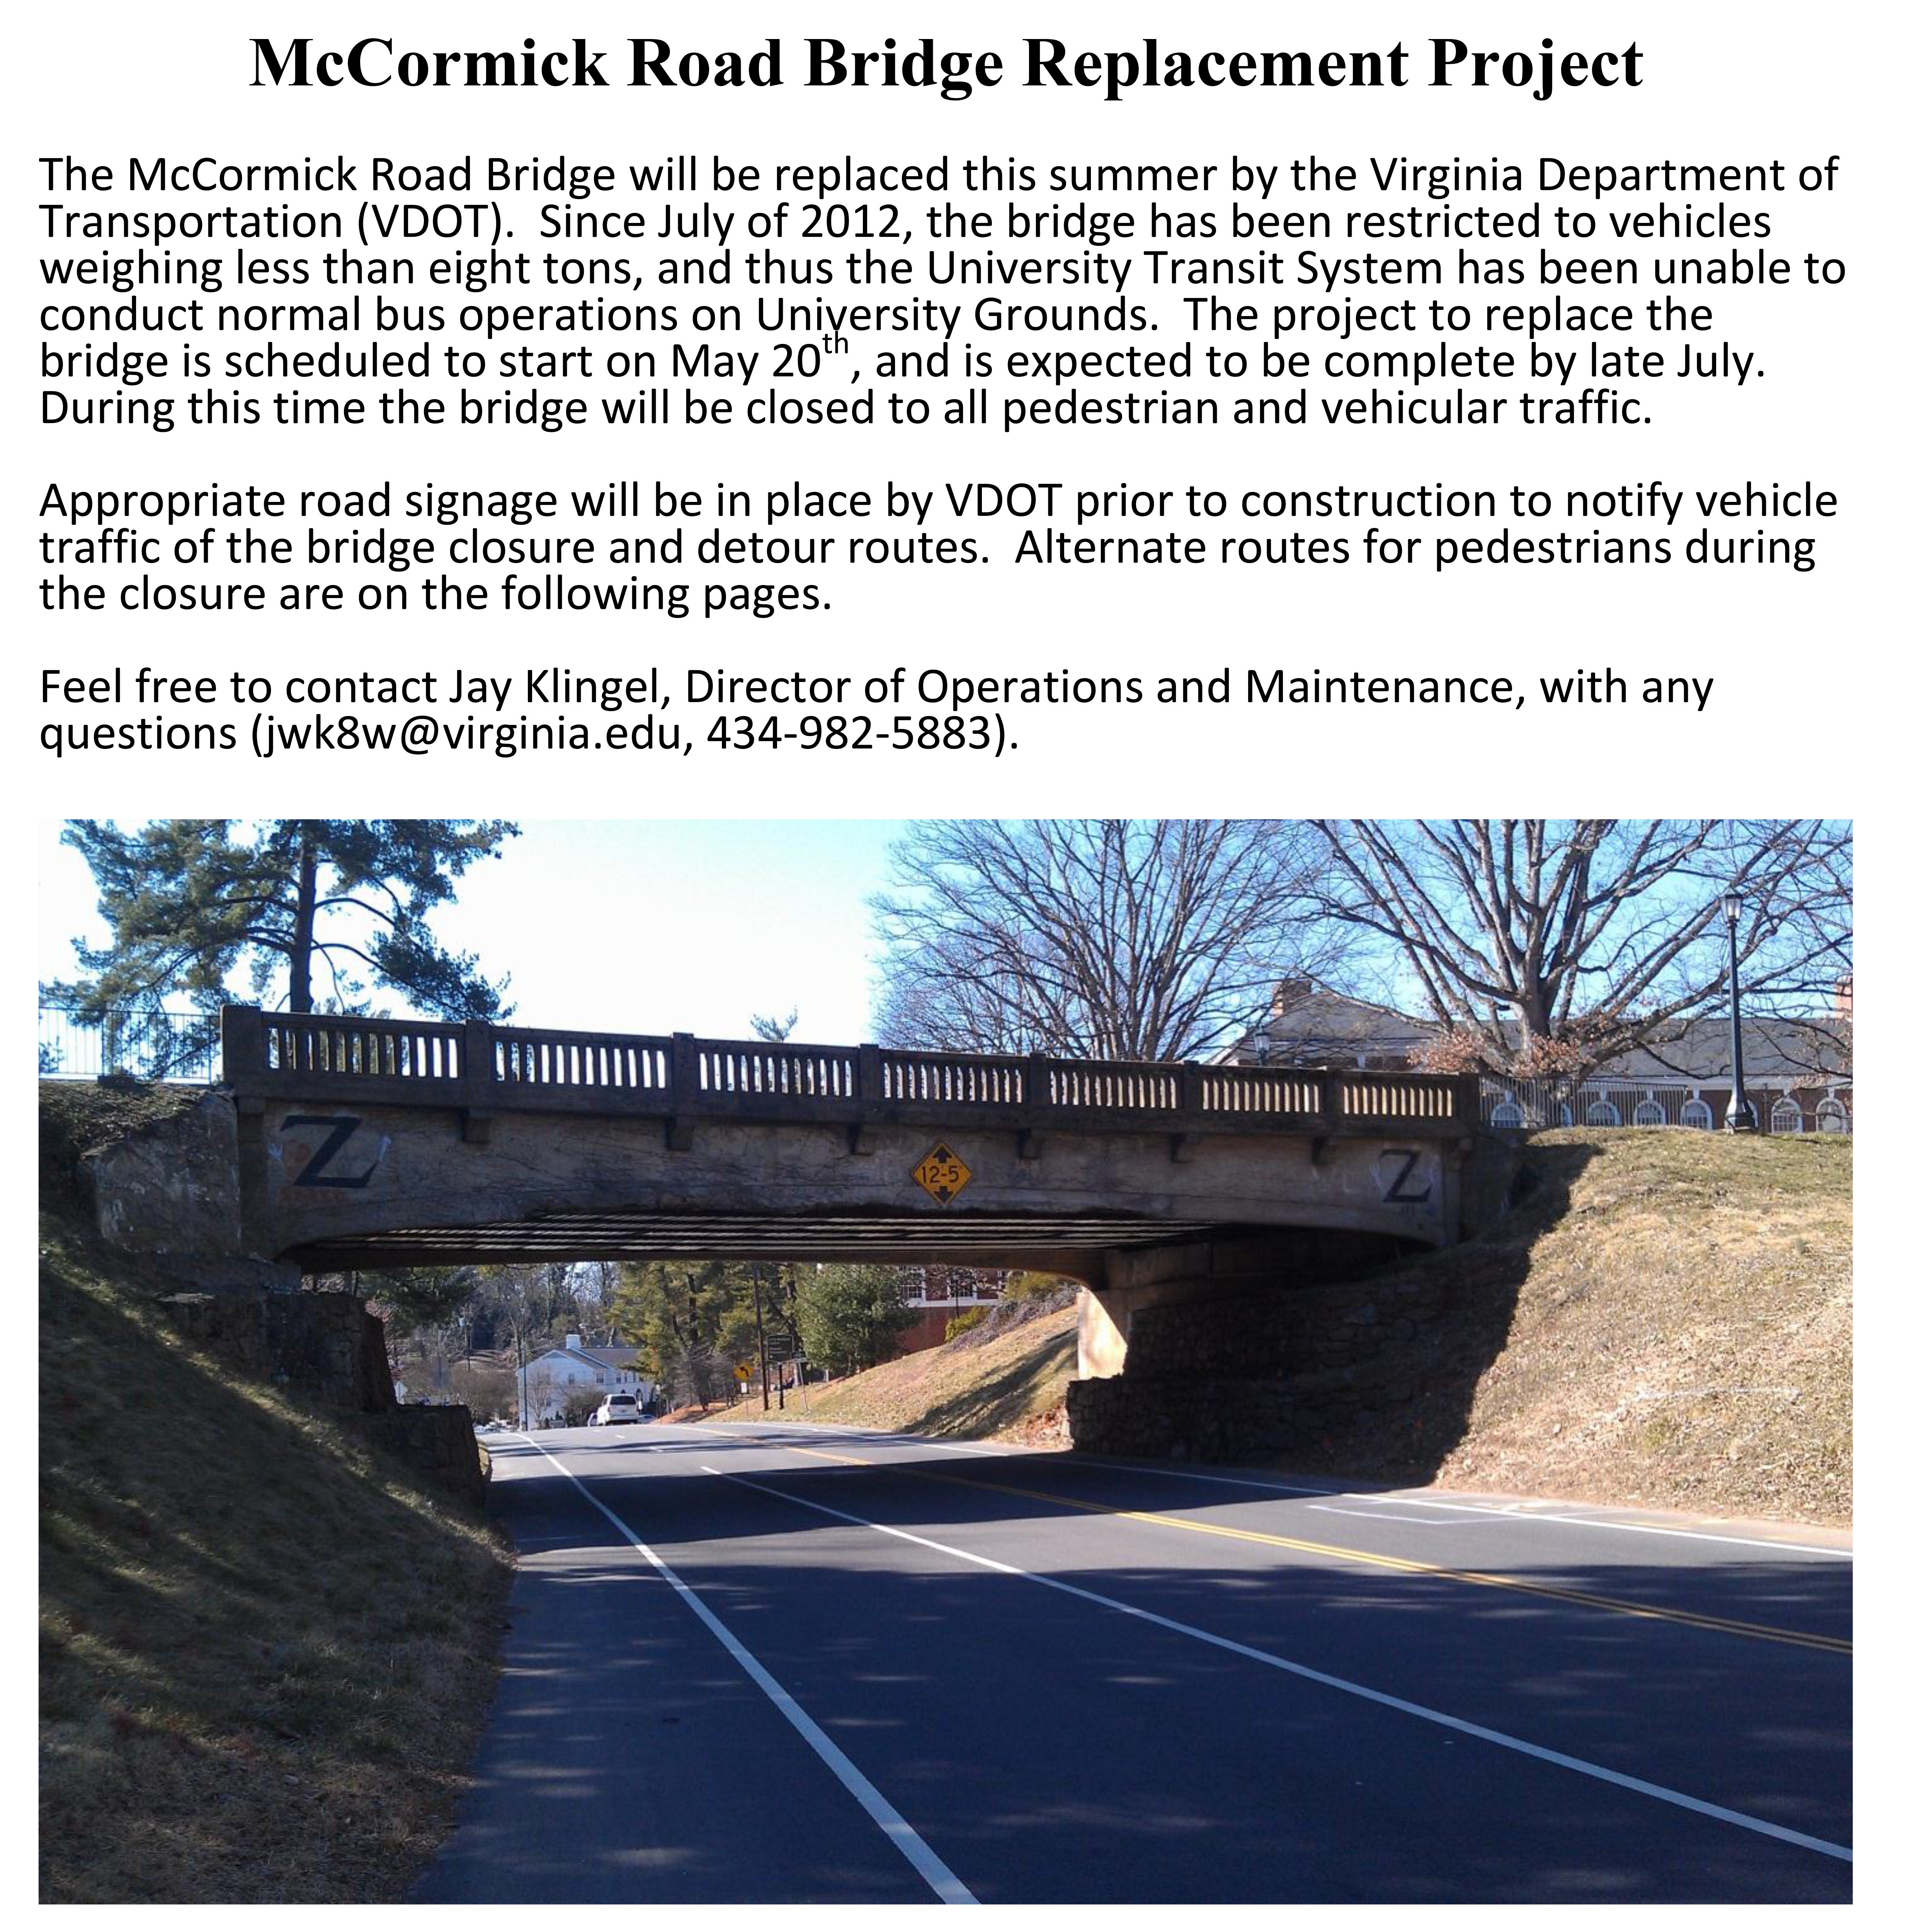 Text reads: The McCormick Road Bridge will be replaced this summer by the Virginia department of transportatioin (VDOT).  Since July of 2012, the bridge has been restricted to vehicles weighing less than eight tons, and thus the University Transit System has been unable to conduct normal bus operations on University Grounds.  The project to replace the bridge is scheduled to start on May 20th, and is expected to be completed by late July.  During this time the bridge will be closed to all pedestrian and